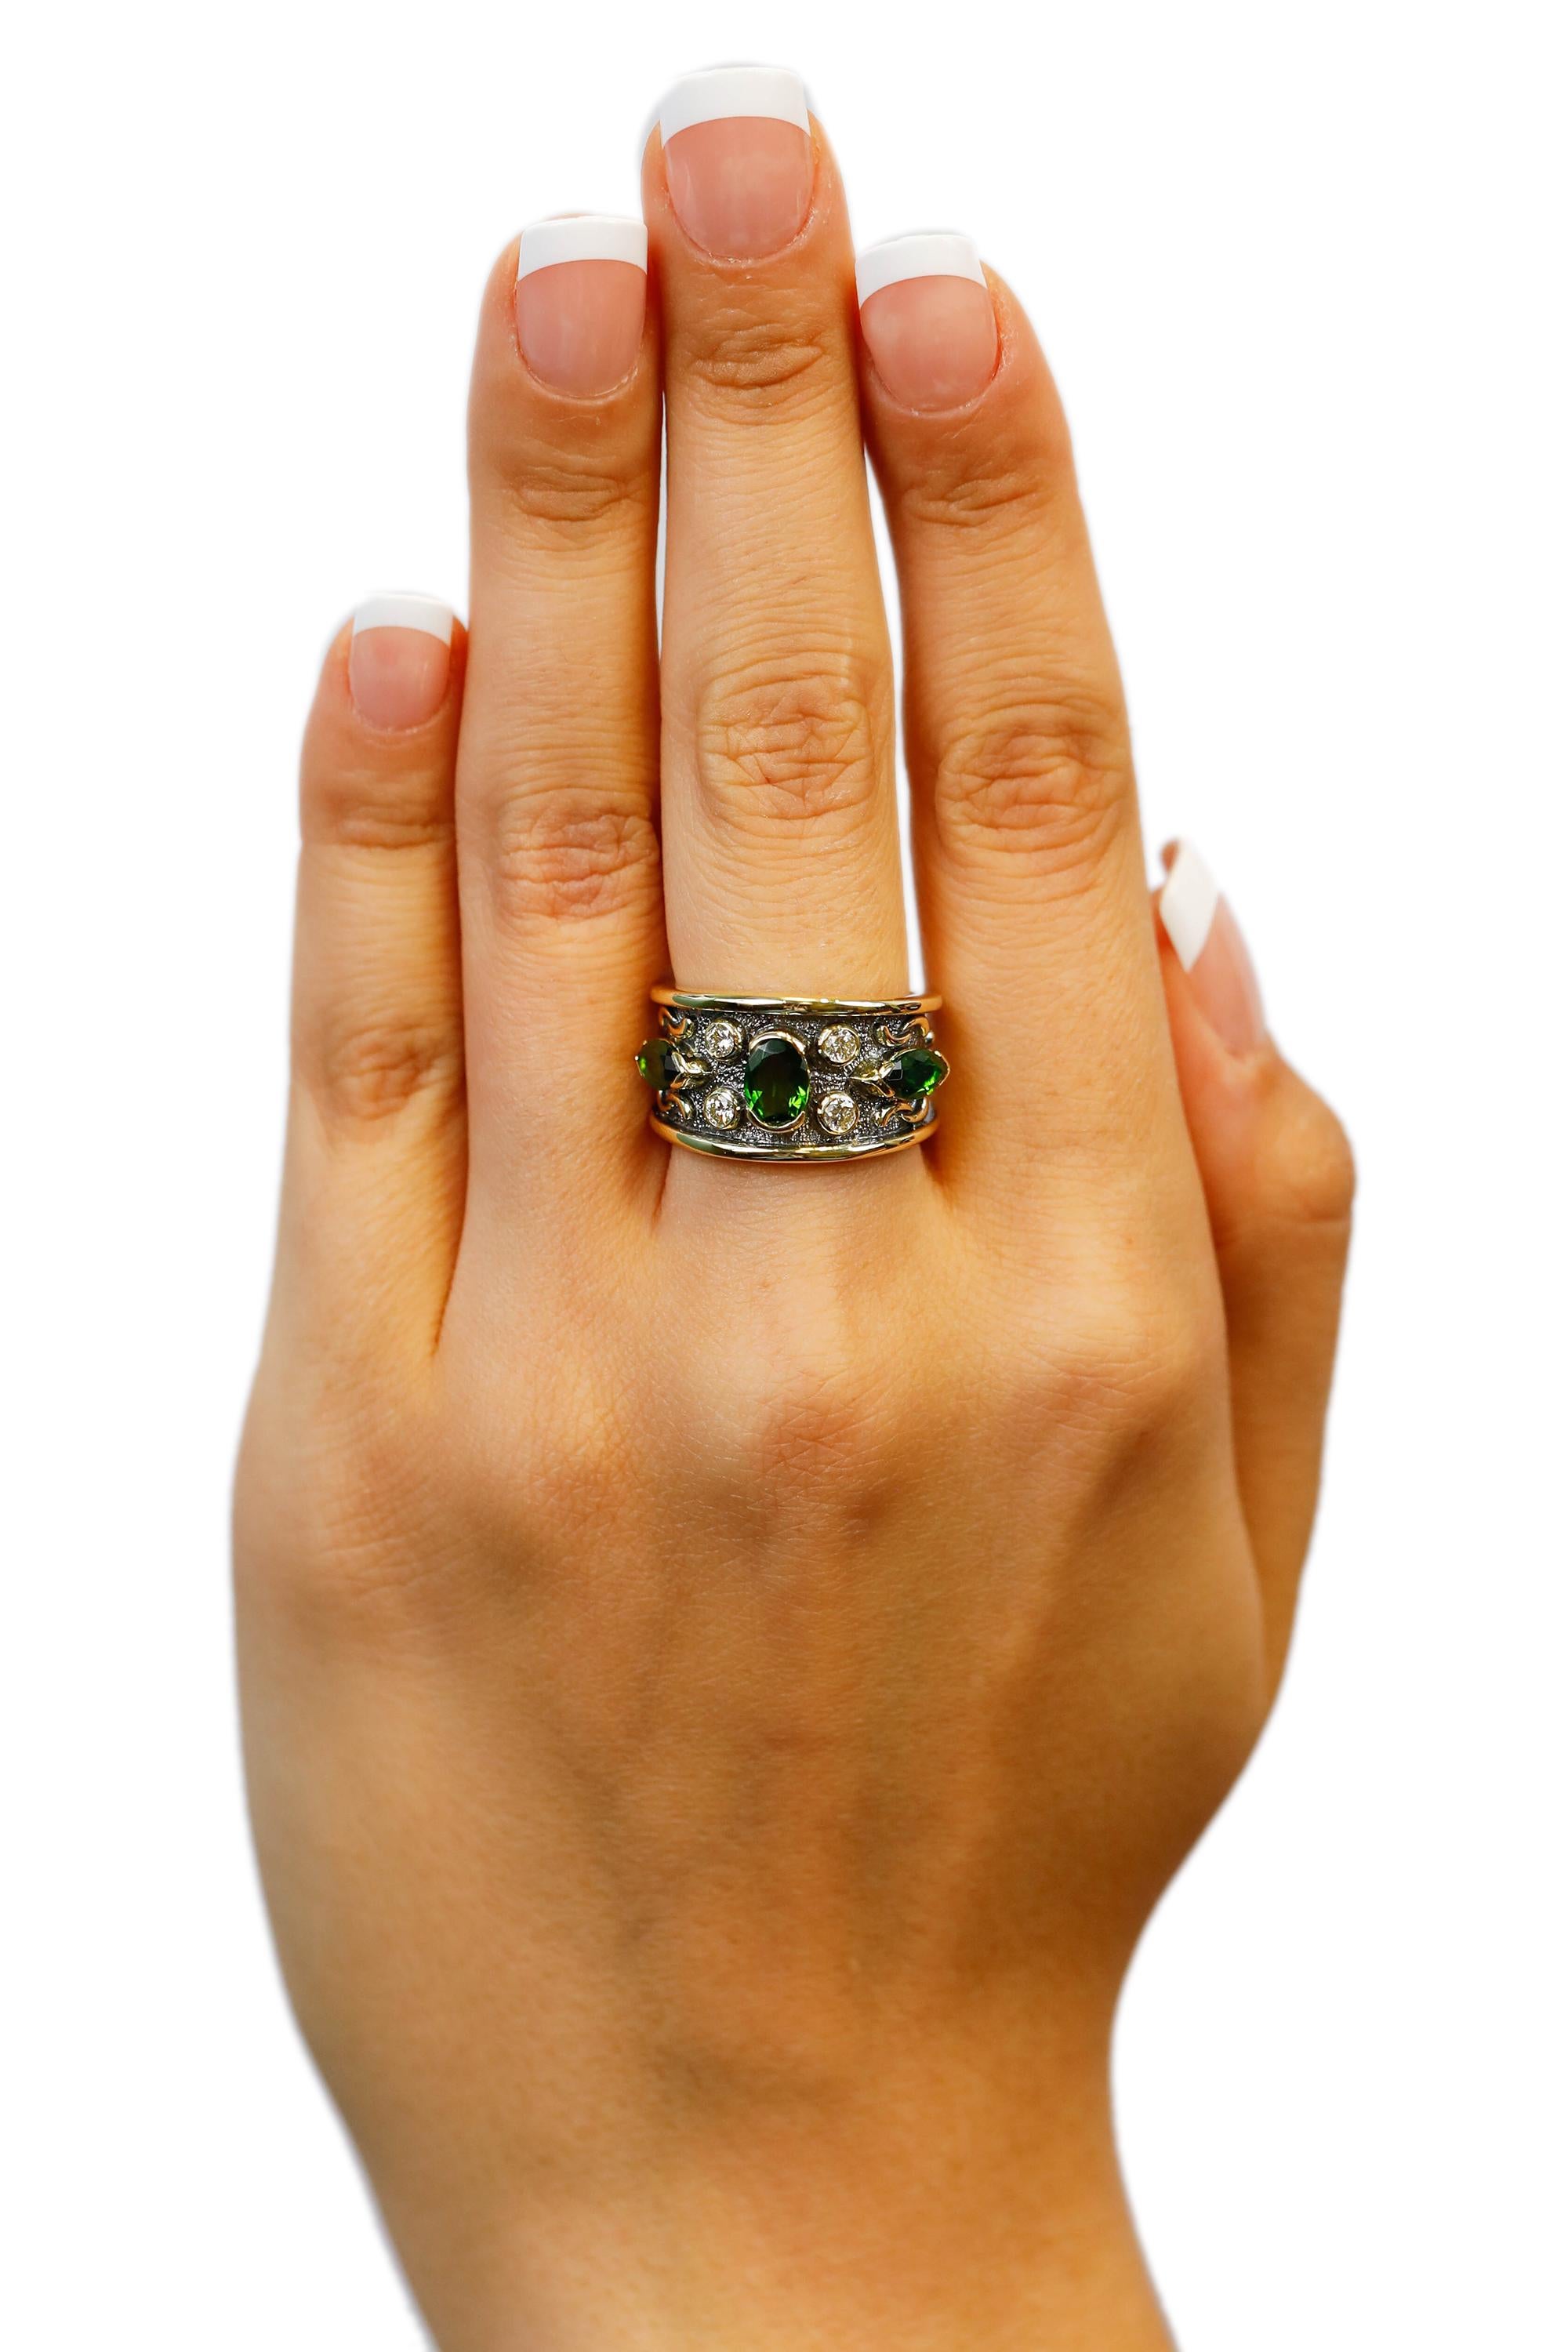 2.5 CT Chrome Diopside Tourmaline and Diamond Band Ring US Size 6

Crafted in 18 kt Yellow Gold, this Unique design showcases a white Diamond 0.35 TCW Round-shaped diamonds, set in yellow gold, fine Oval, and marquise shape mesmerizing 2.5 ct Chrome